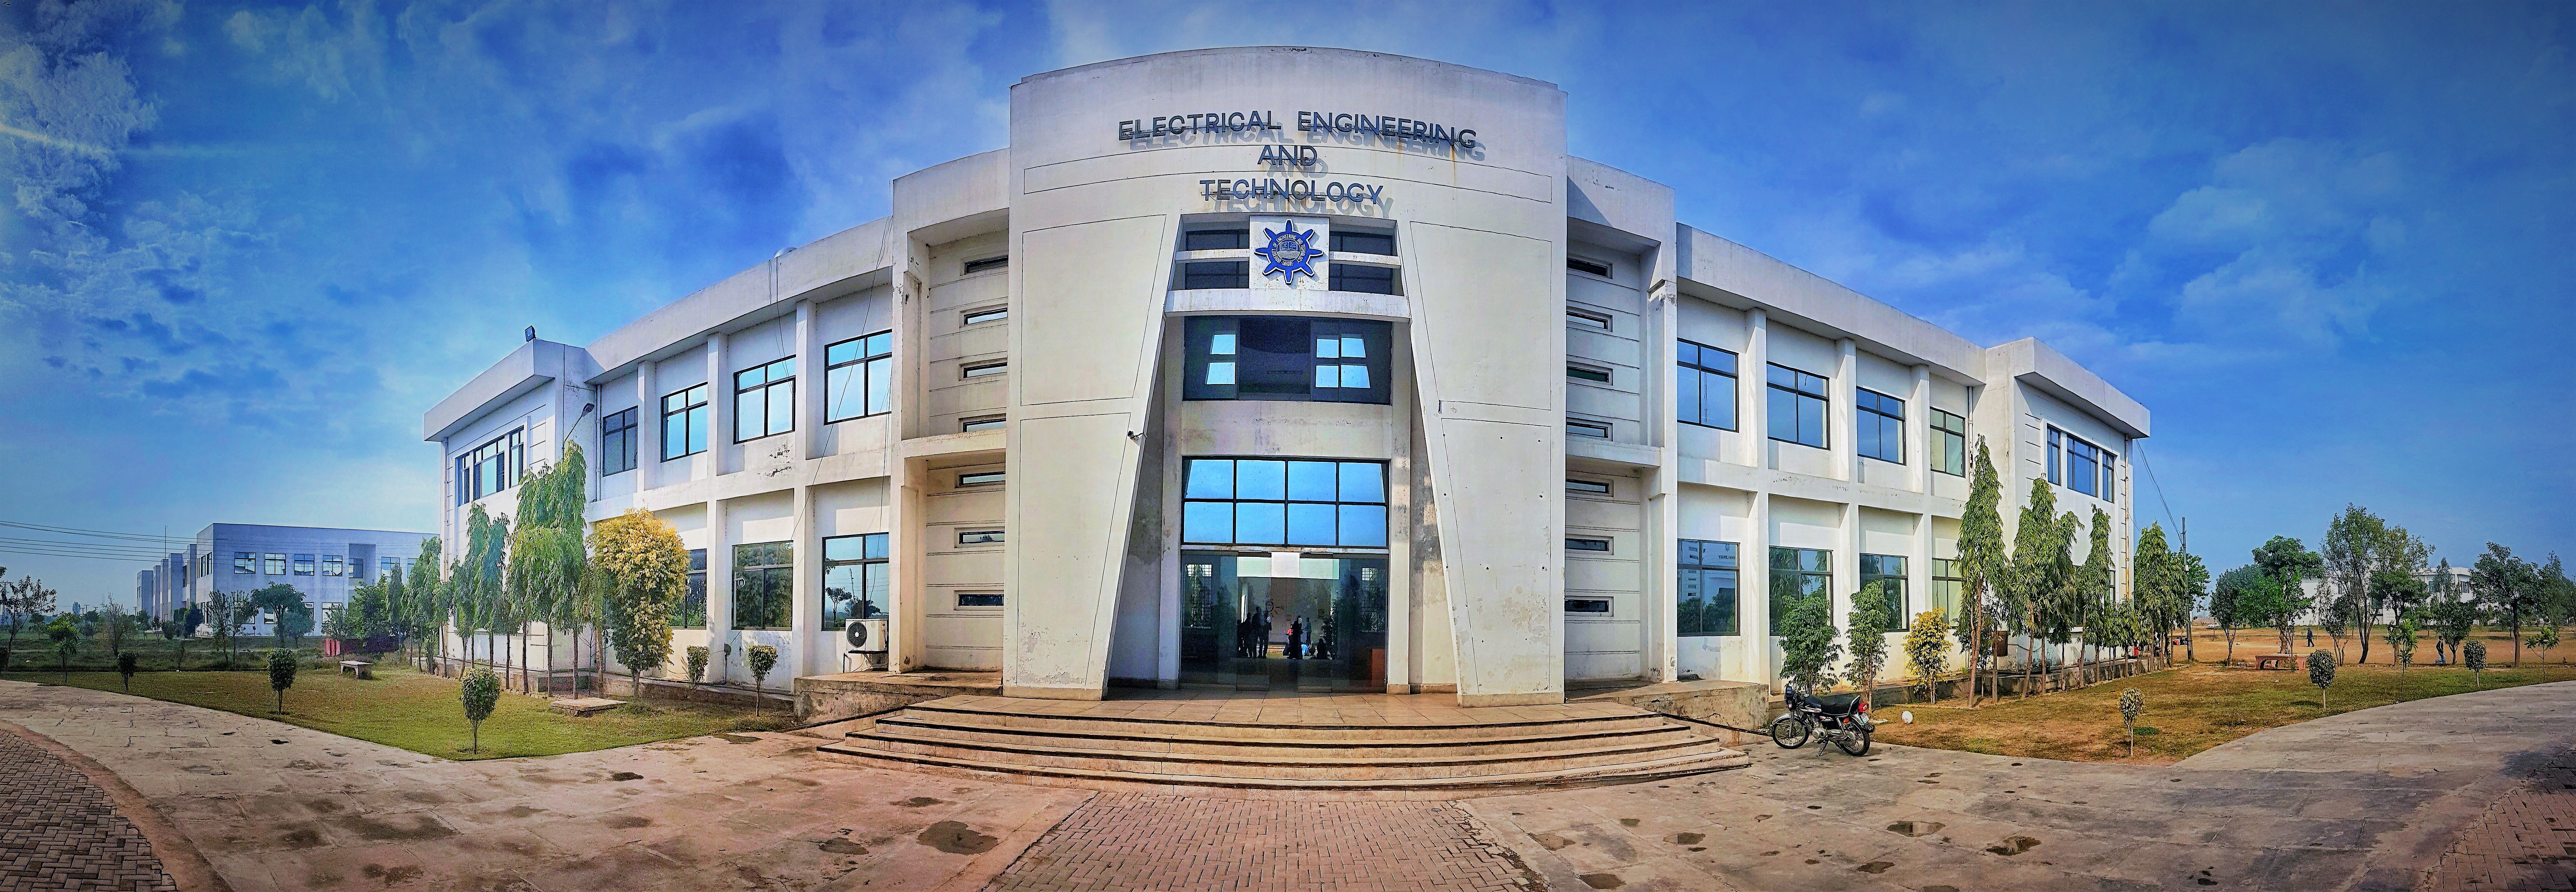 DEPARTMENT OF ELECTRICAL ENGINEERING